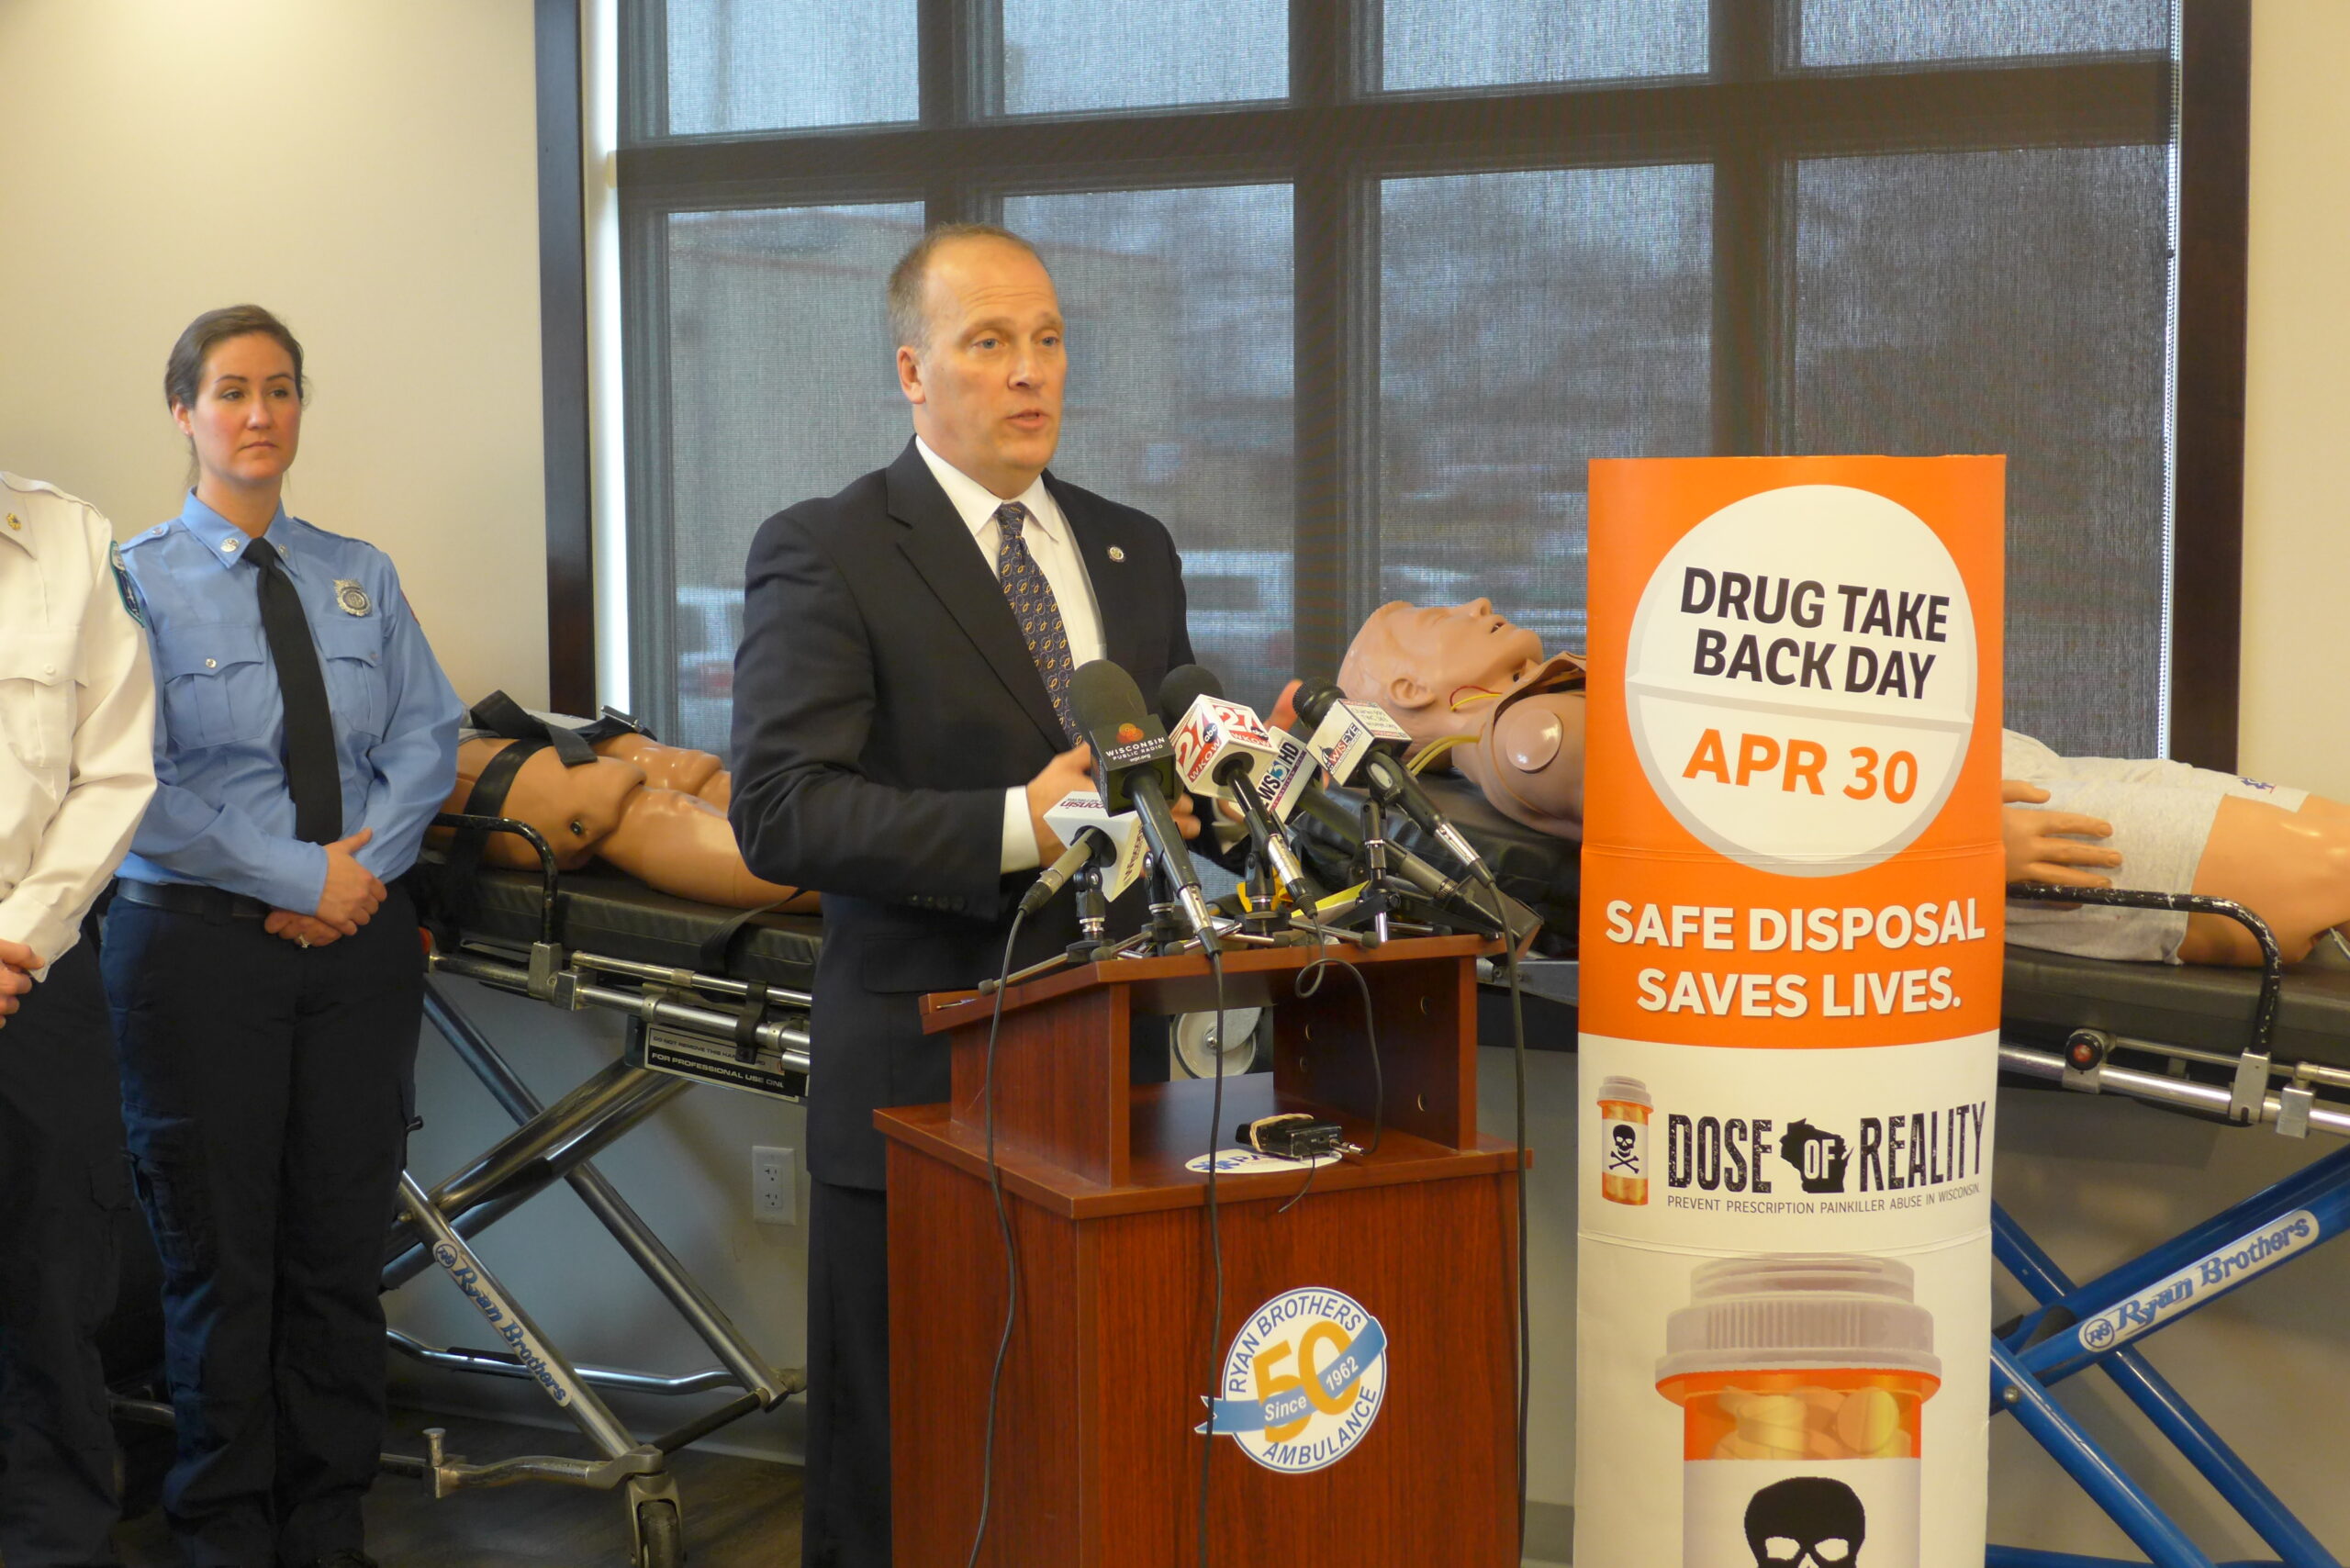 Attorney General Brad Schimel announcing the rebate program with Amphastar Pharmaceuticals for buying pre-filled Naloxone syringes for Abmulance EMT’s to use in revving people who have suffered  a heroin overdose.